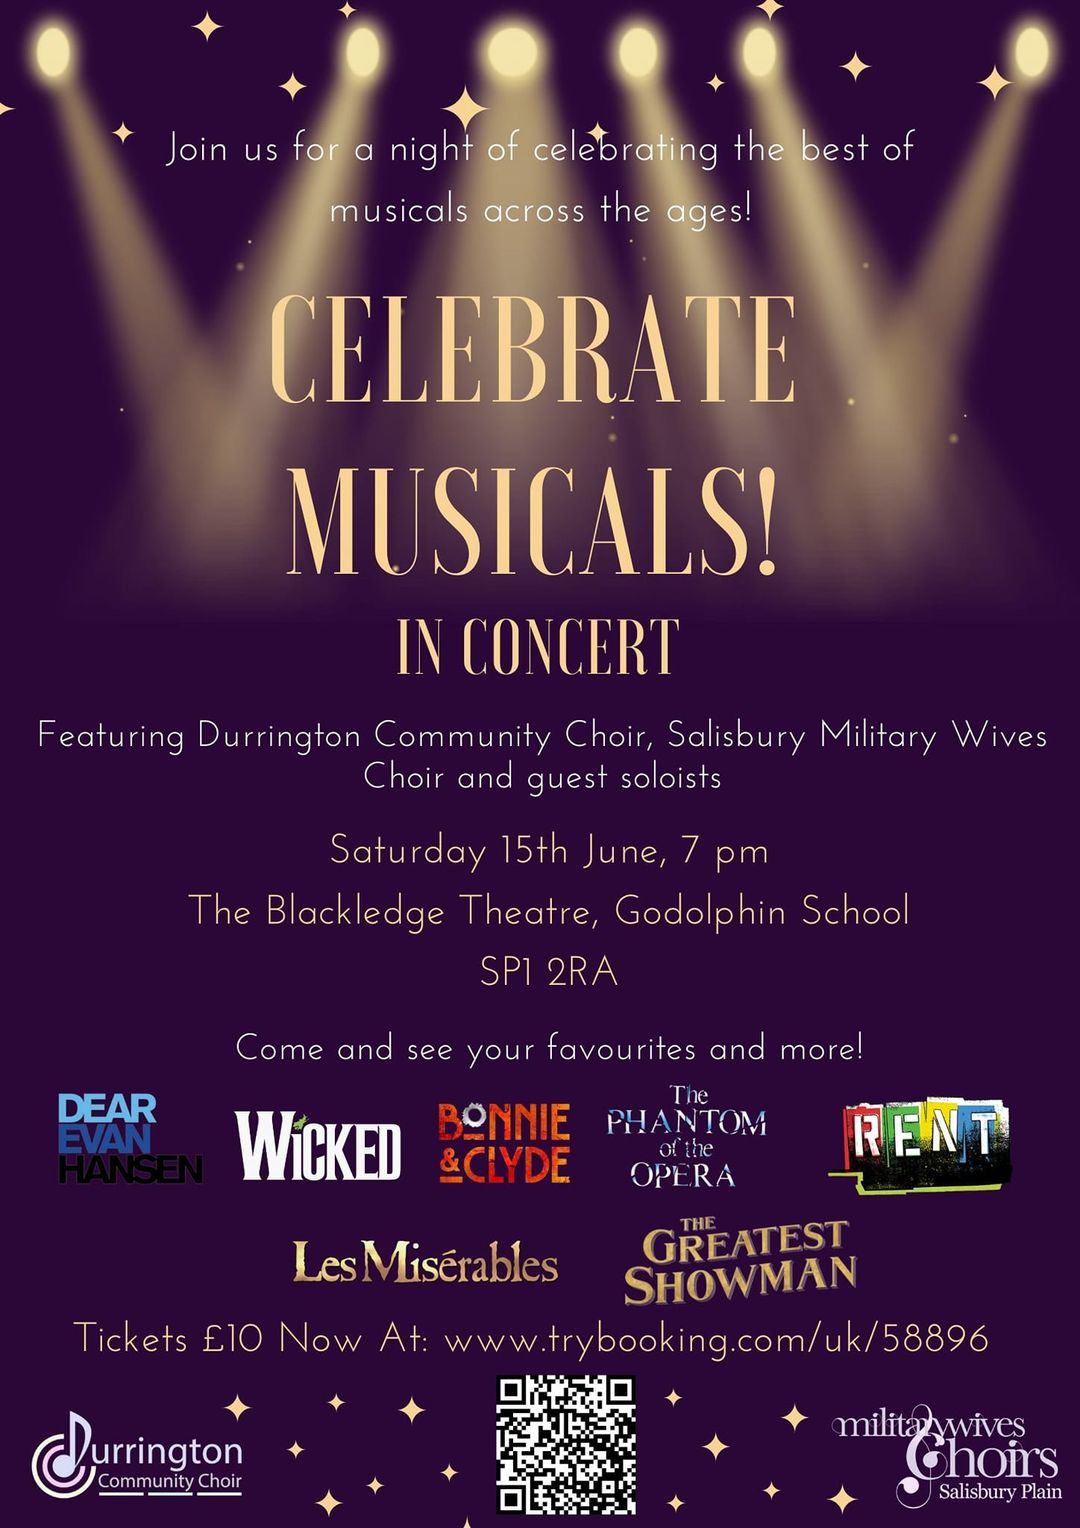 CELEBRATE MUSICALS! in concert: Durrington Community Choir + Salisbury Military Wives Choir and guest soloists